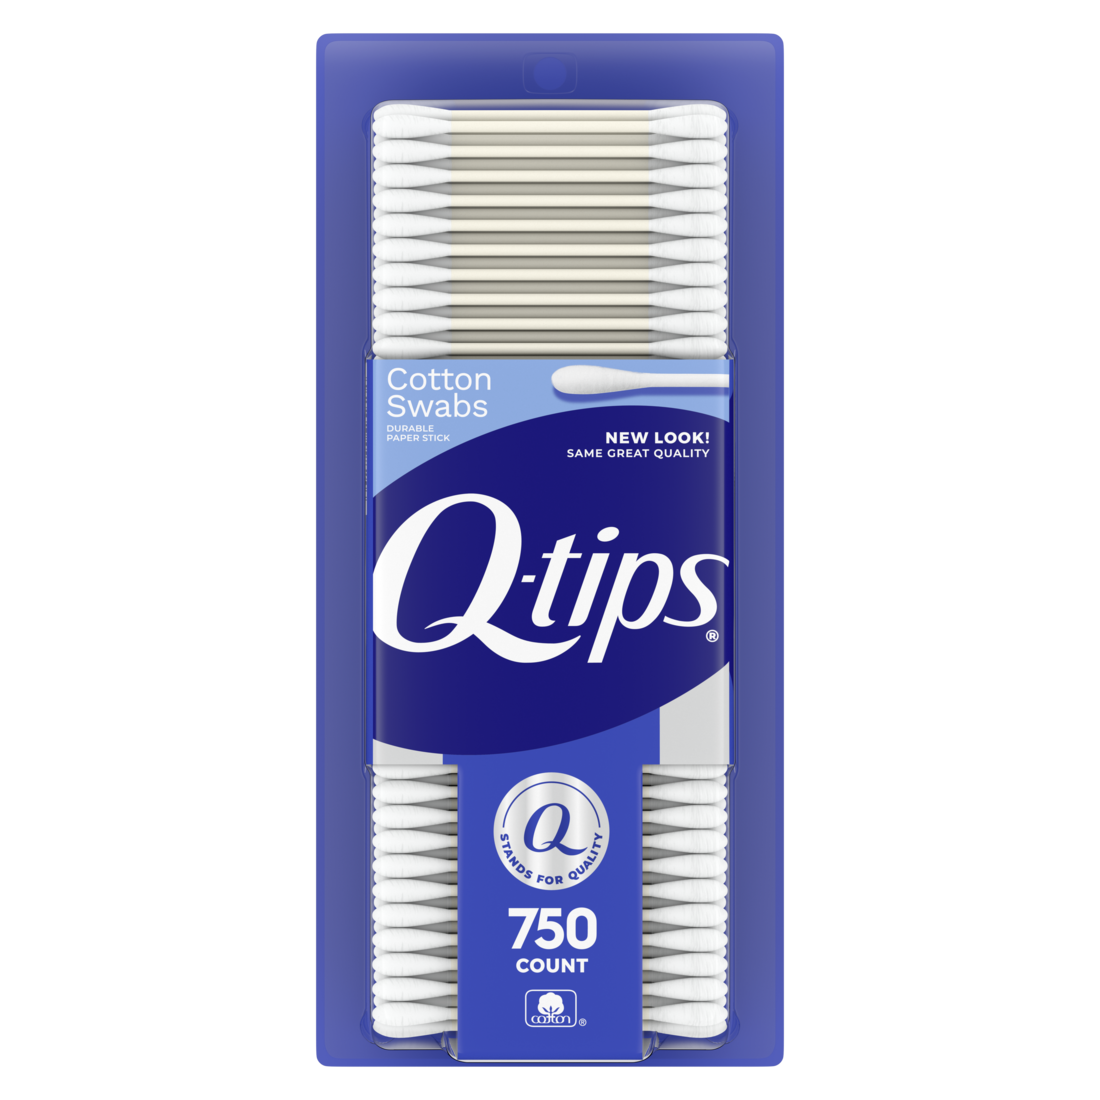 Q-tips Cotton Swabs, Original, For Home, First Aid and Beauty, 100% Cotton, 750 Count - image 1 of 7